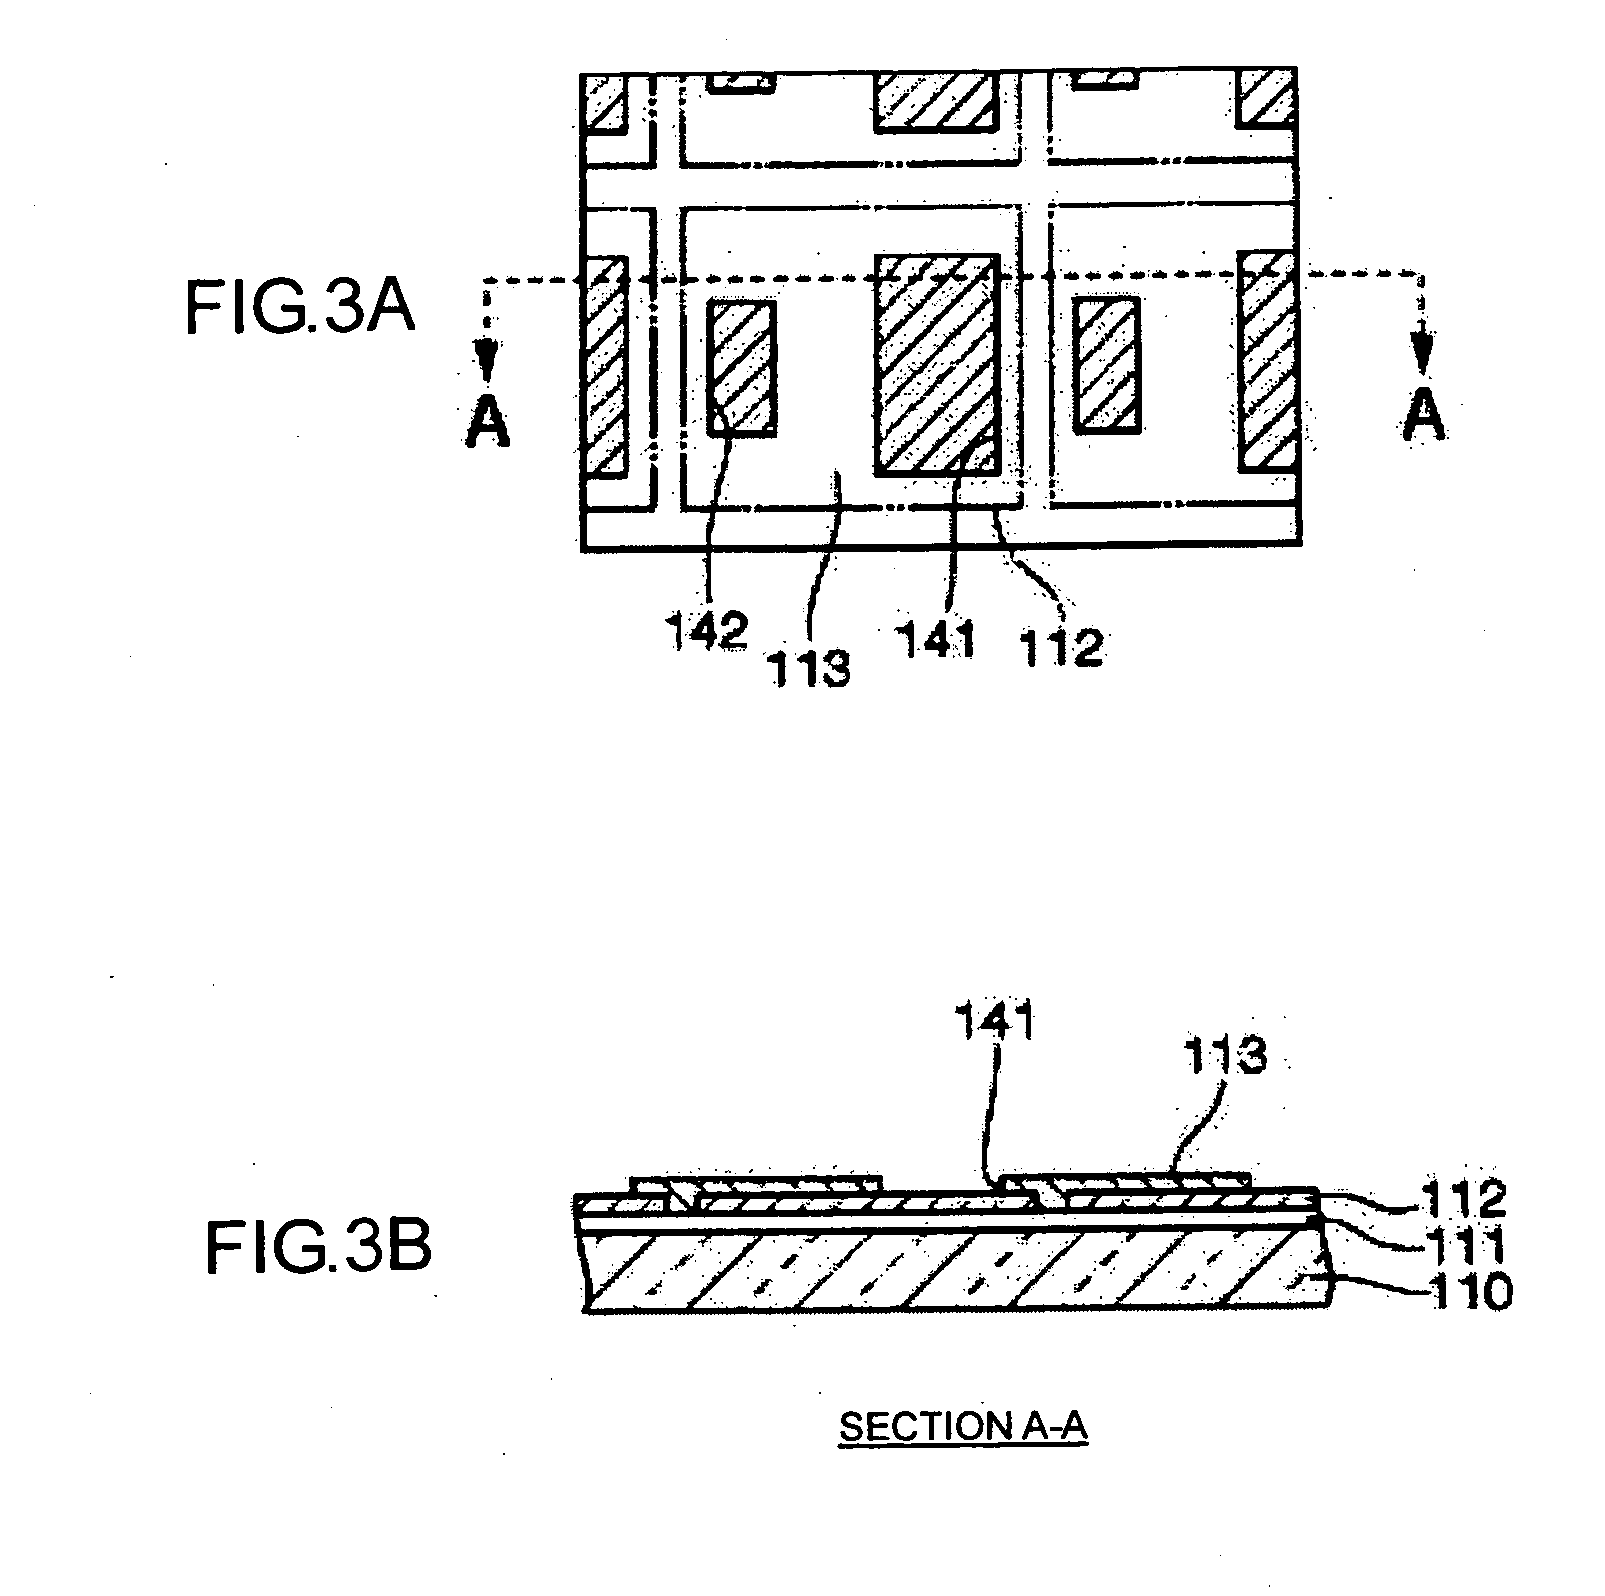 Pixel element substrate, display device, electronic device, and method for manufacturing the pixel element substrate